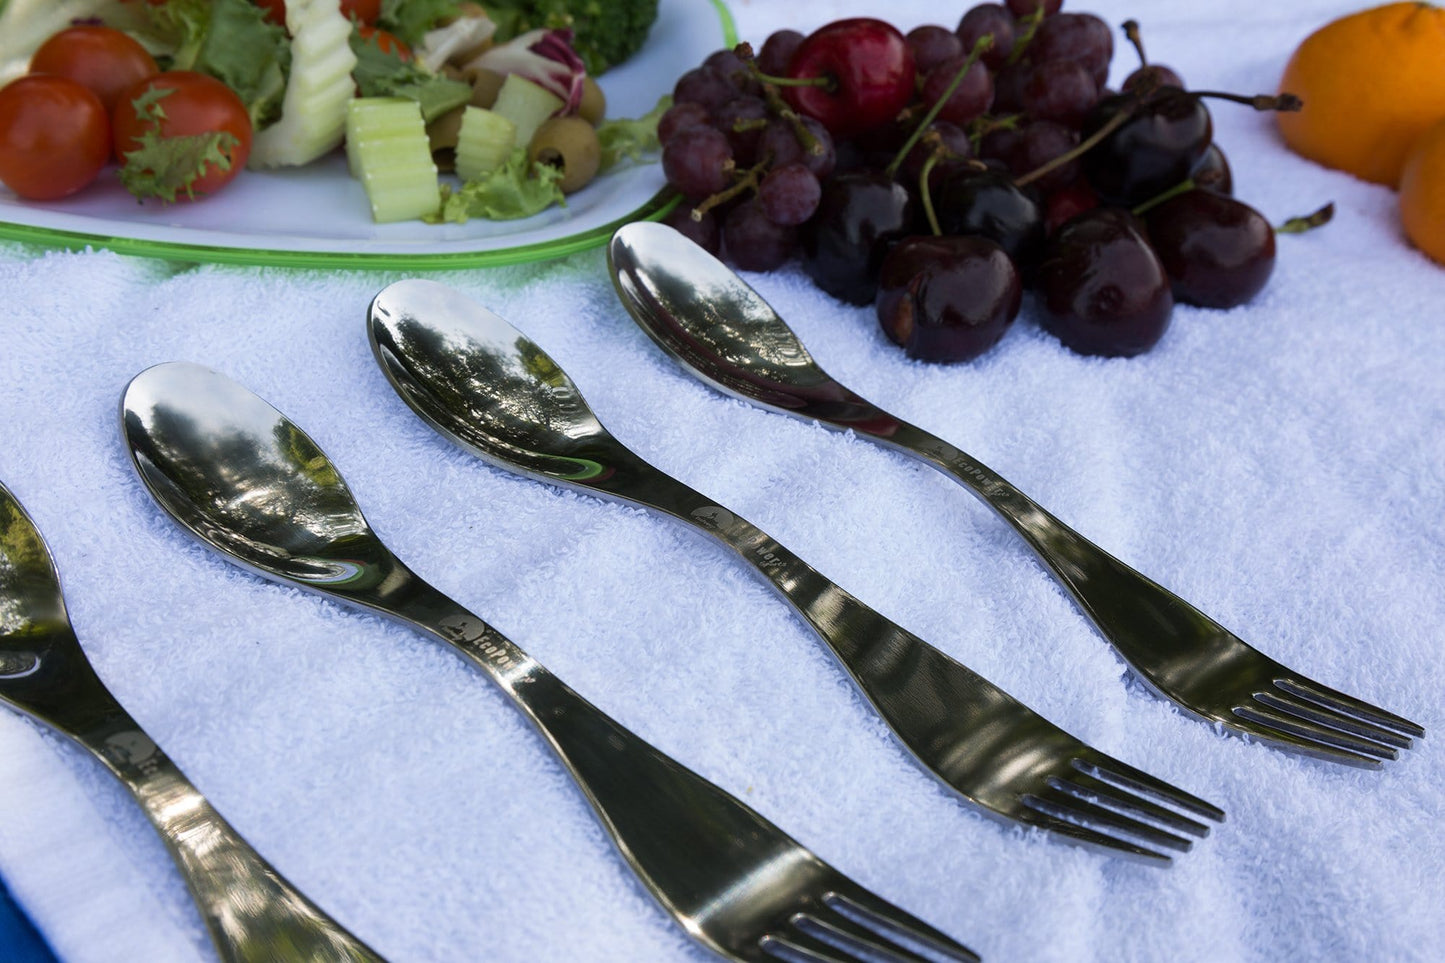 The sporks set can be found in 1 or 2 units per set. light weight  and easy to wash, can be  used in your dishwasher. it is made of strong and polished stainless steel.